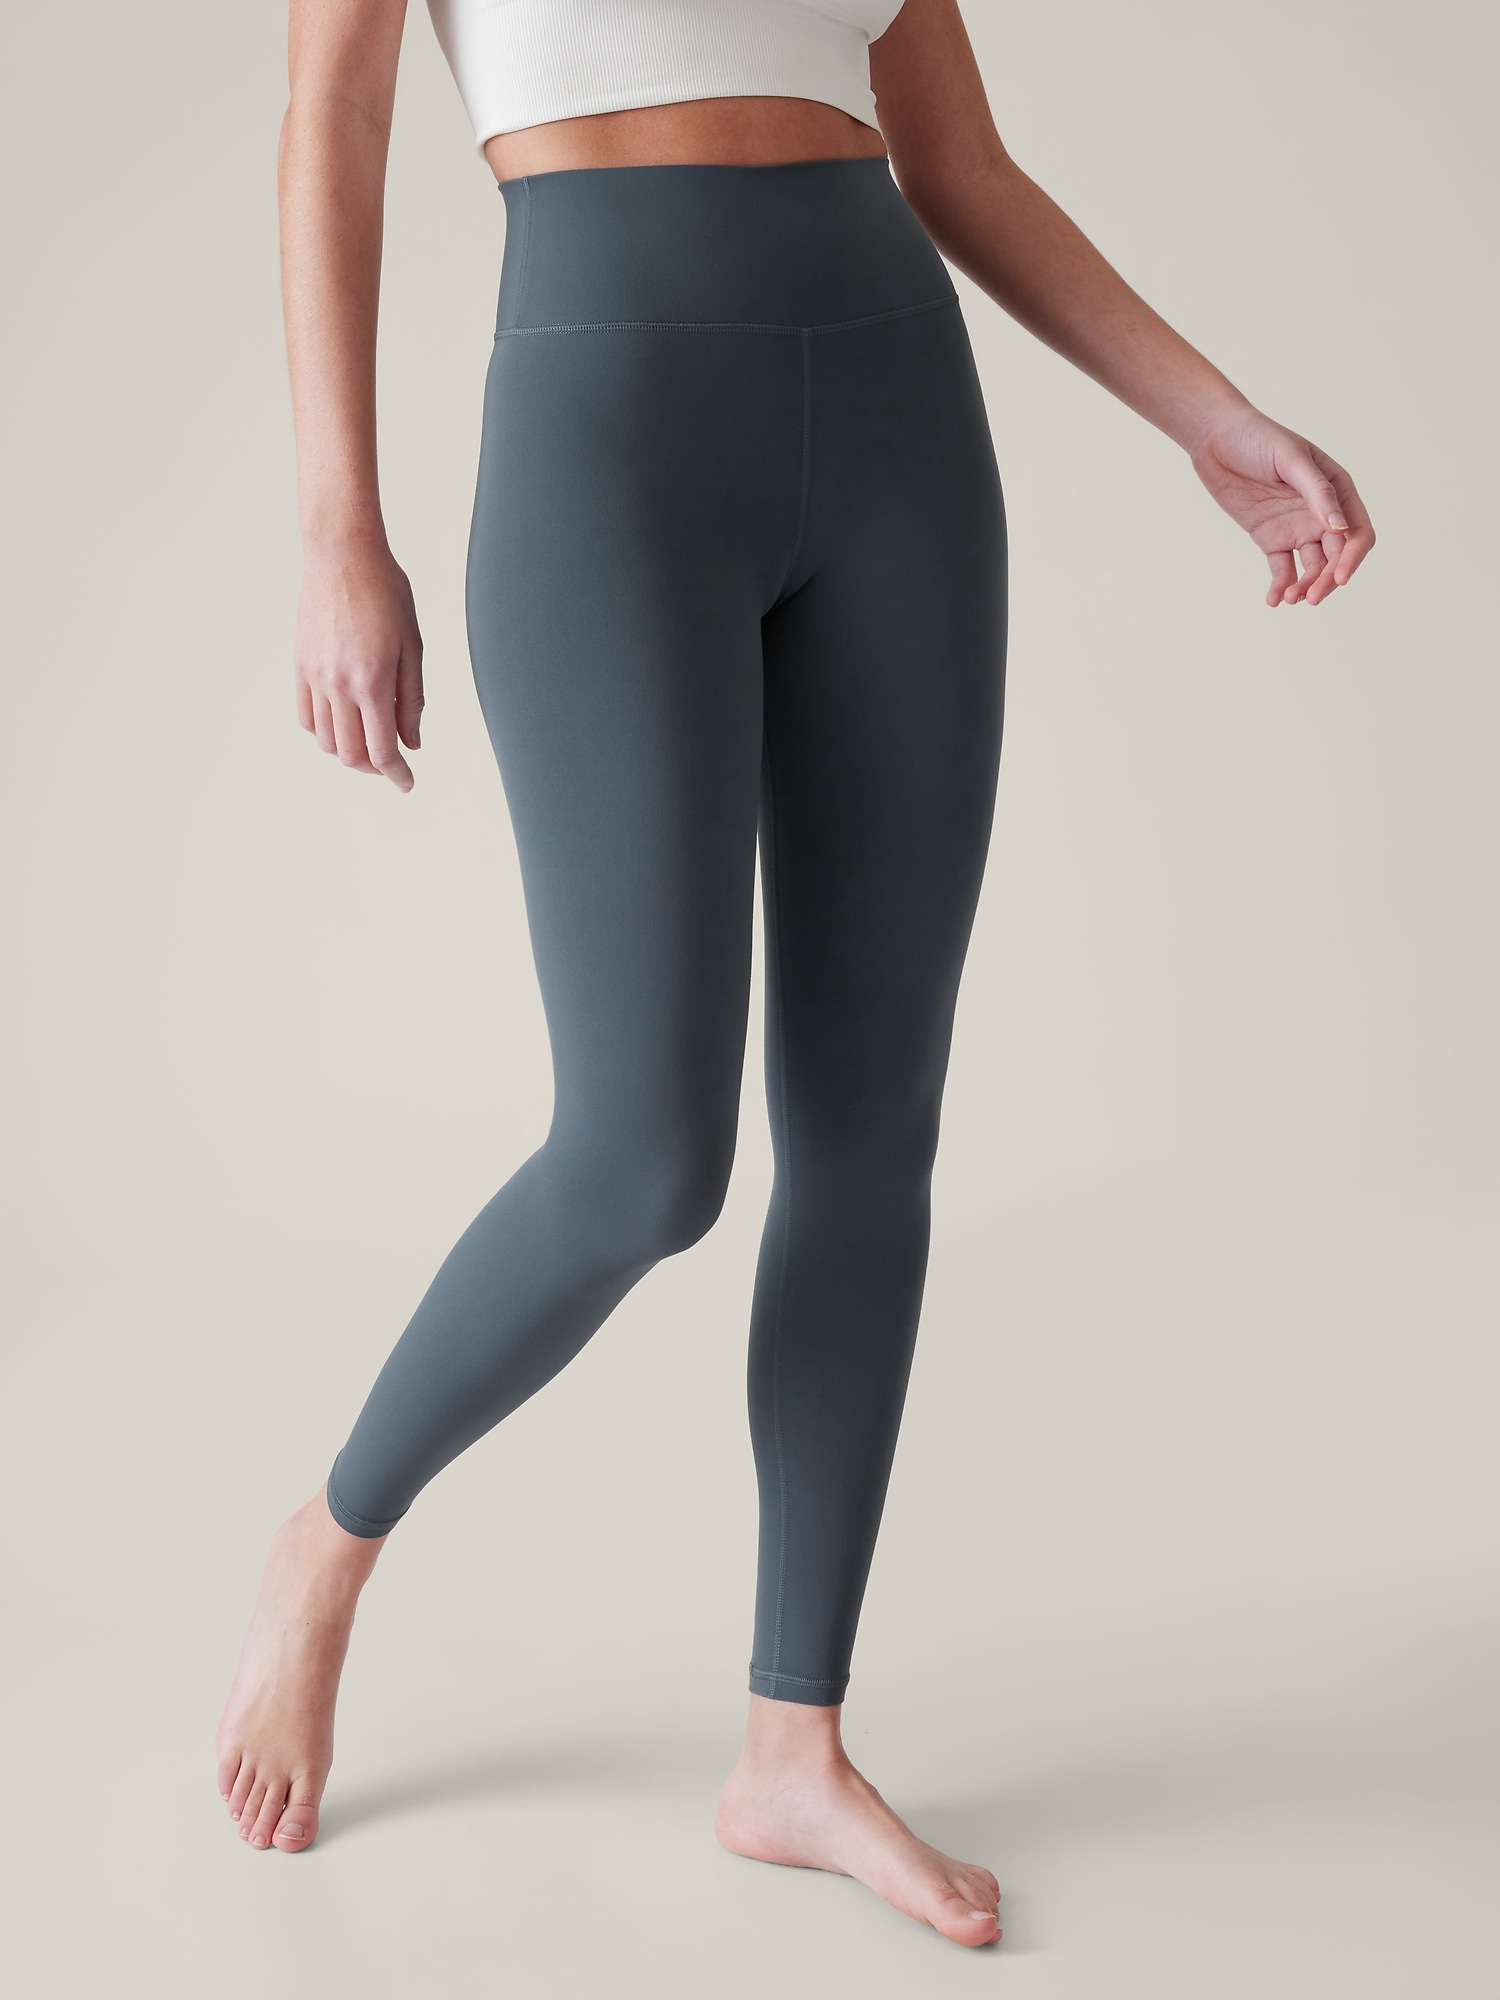 These Athleta Sculpting Jeans Are as Comfortable as Leggings